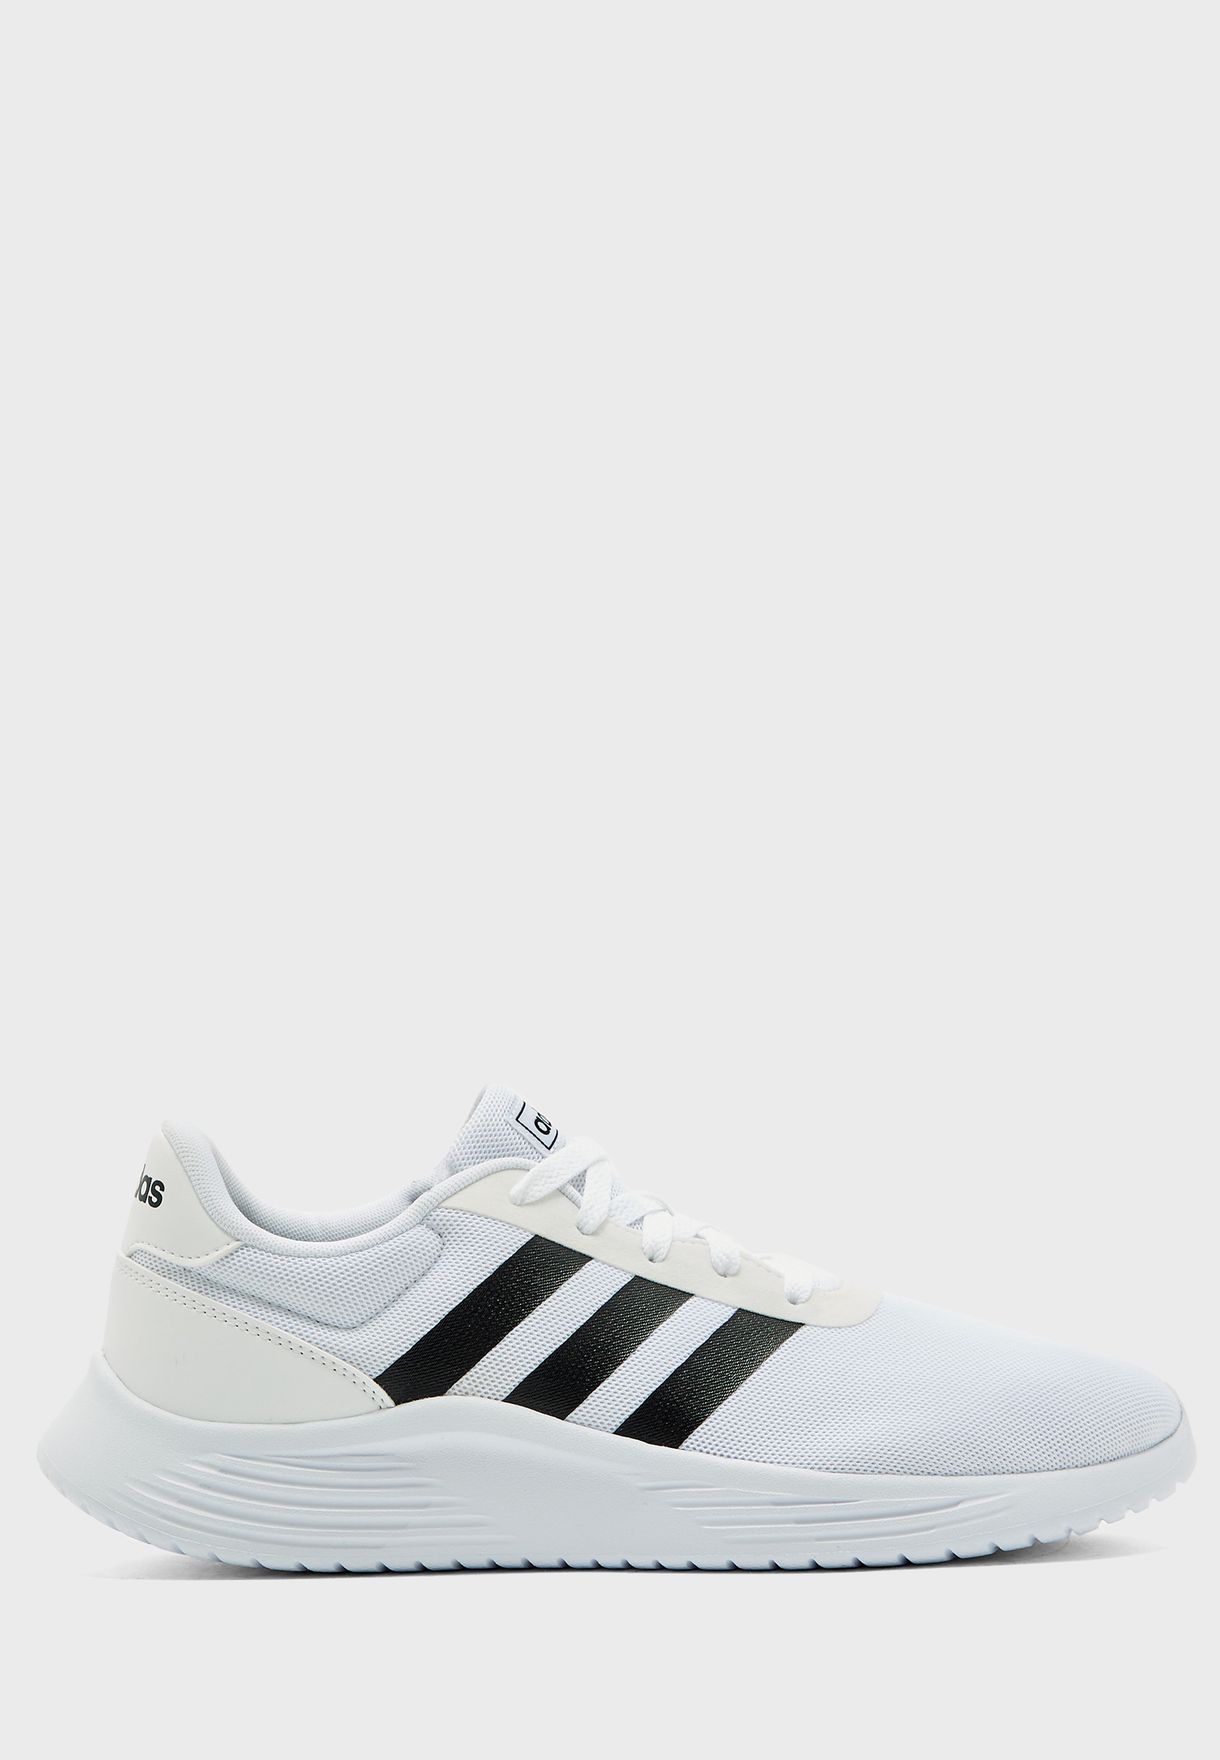 adidas male shoes